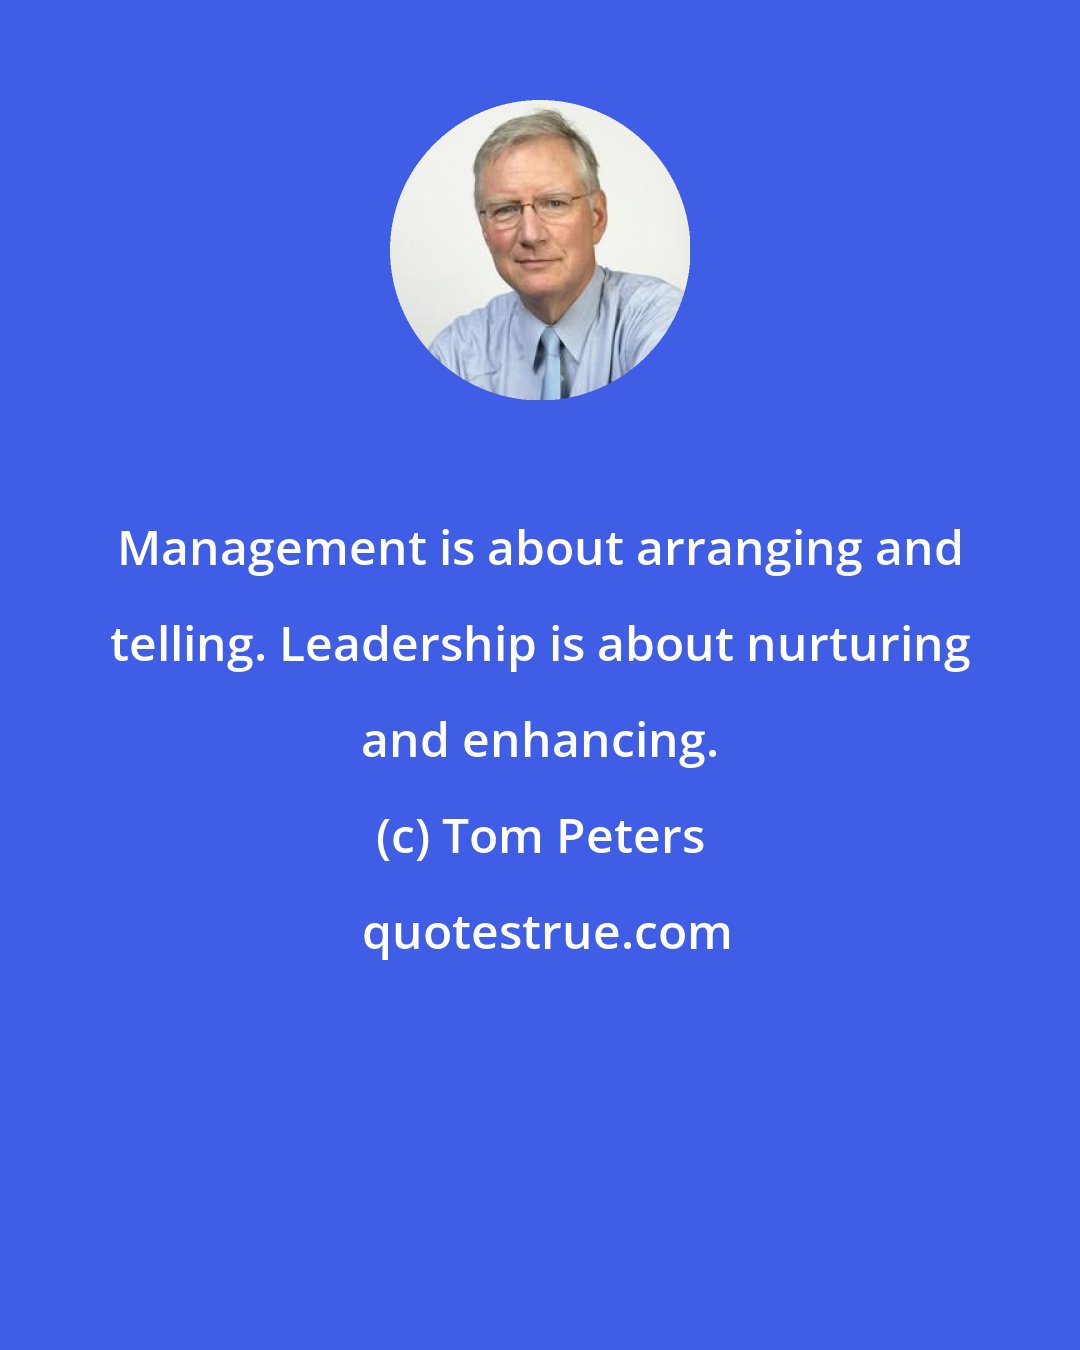 Tom Peters: Management is about arranging and telling. Leadership is about nurturing and enhancing.